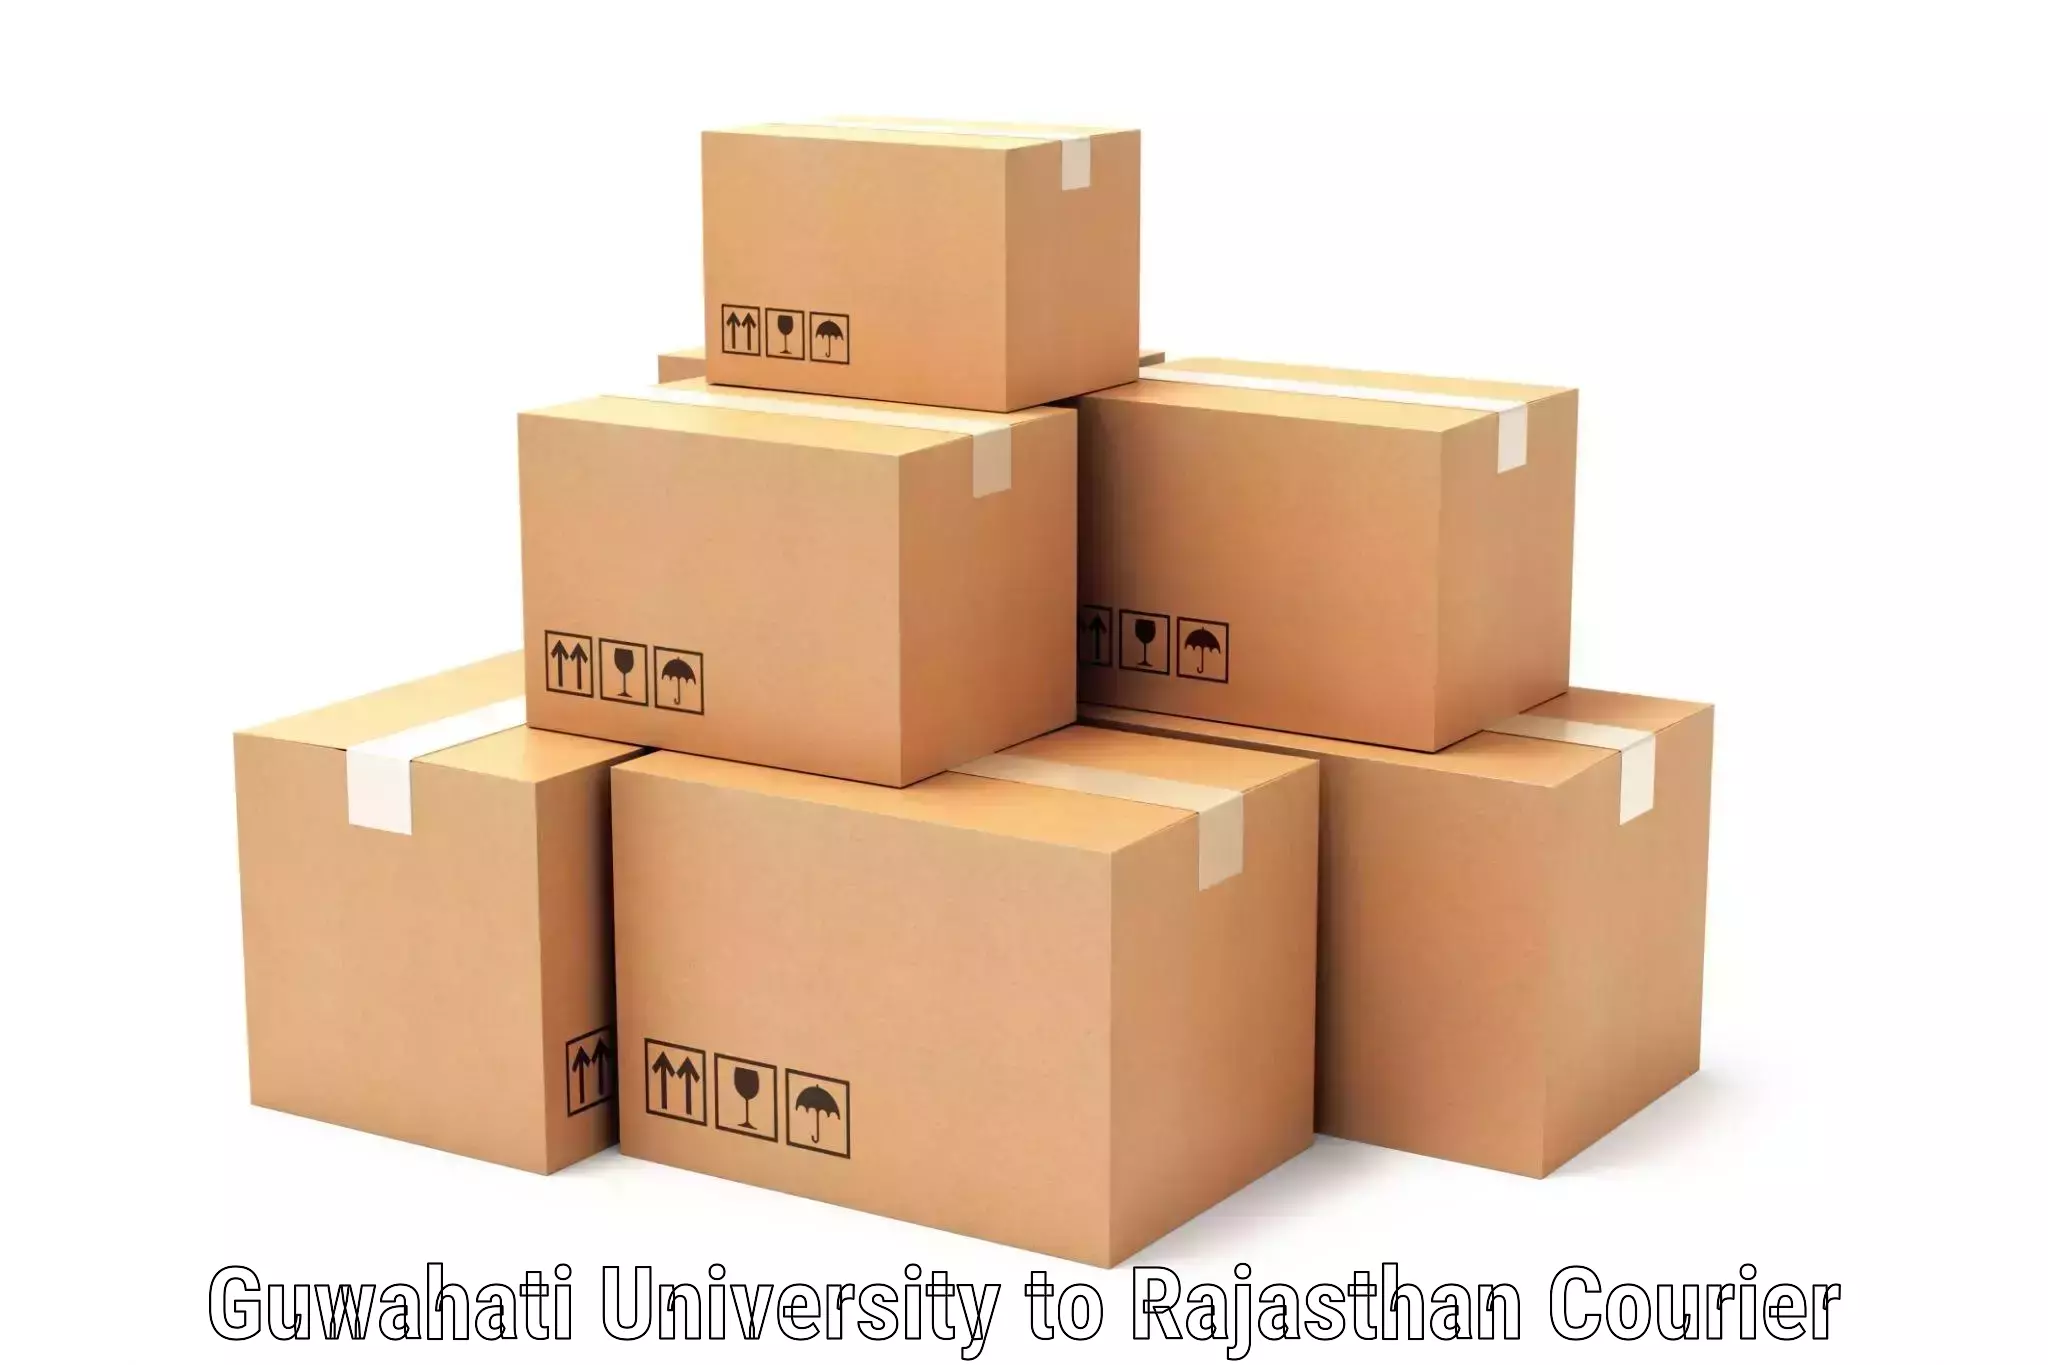 Reliable parcel services Guwahati University to Bagru